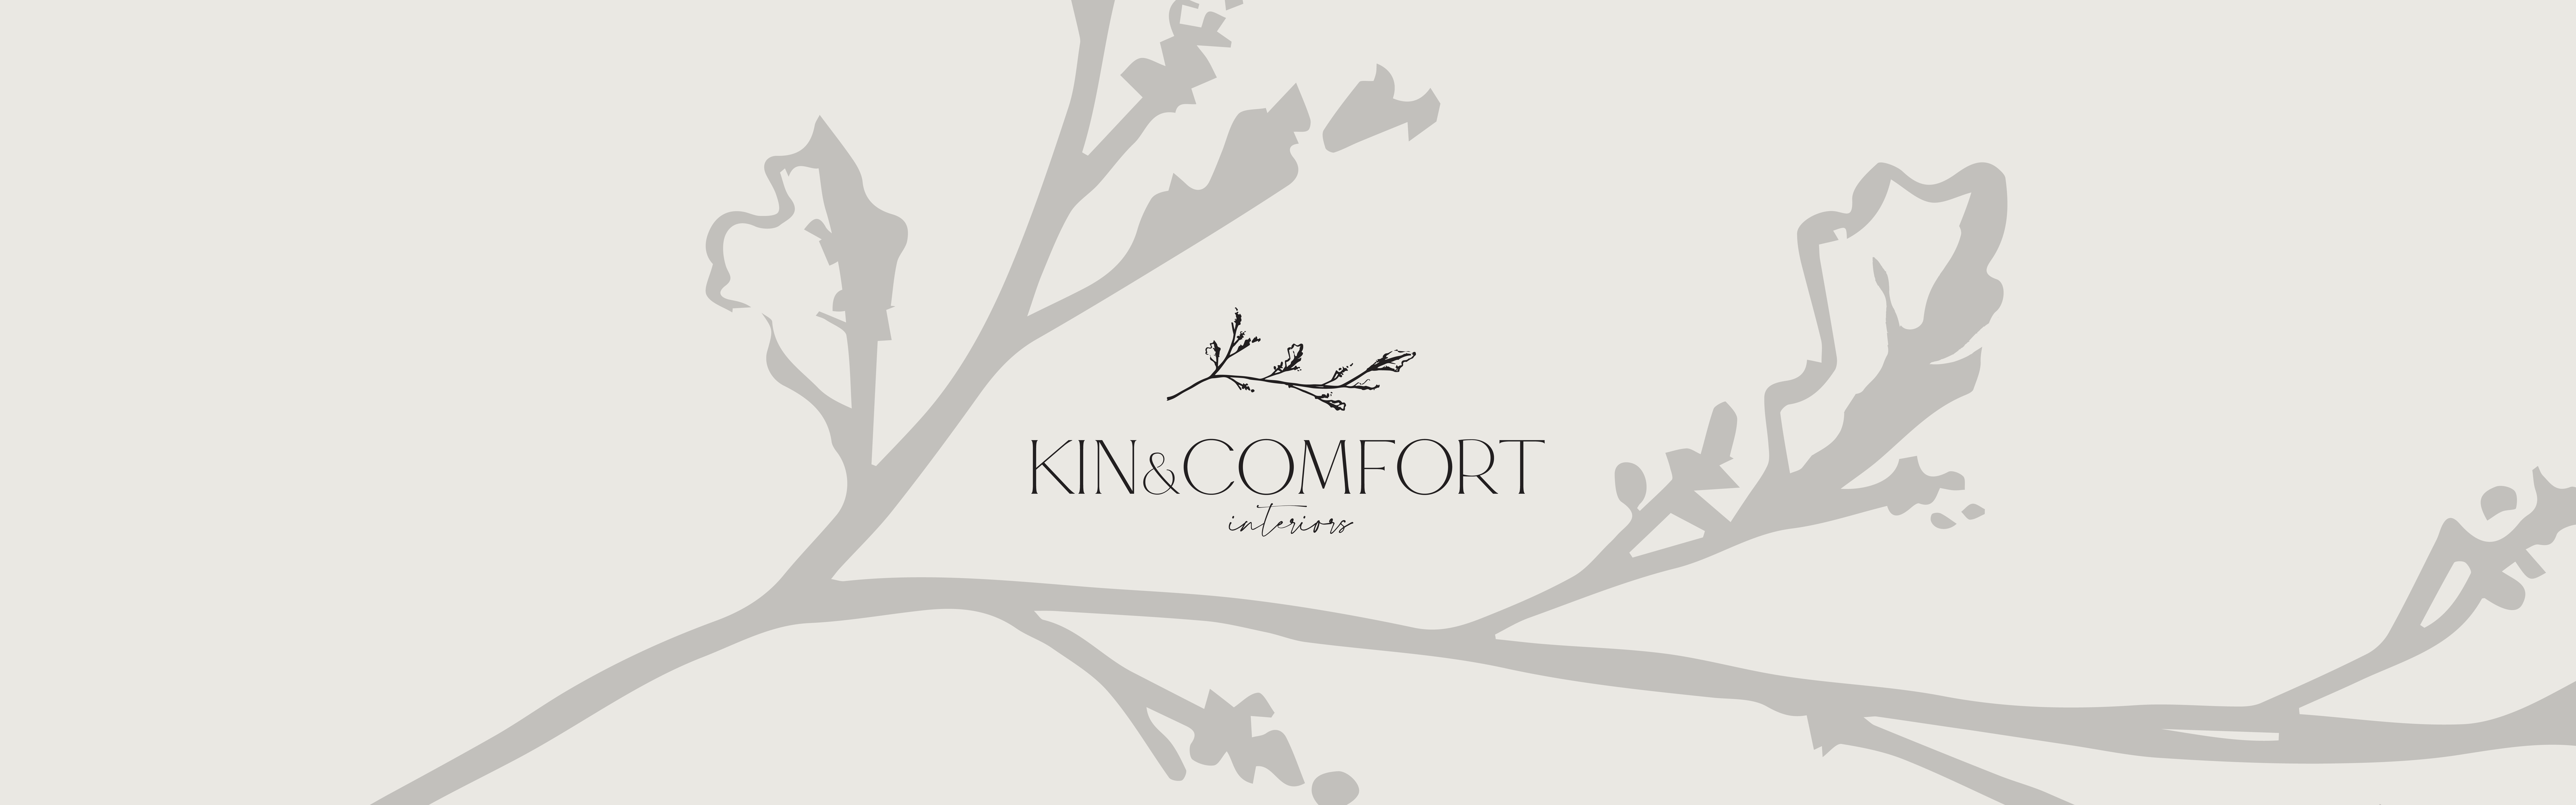 A minimalist brand design with the words "Kin & Comfort Interiors" displayed over an elegant grayscale illustration of tree branches.